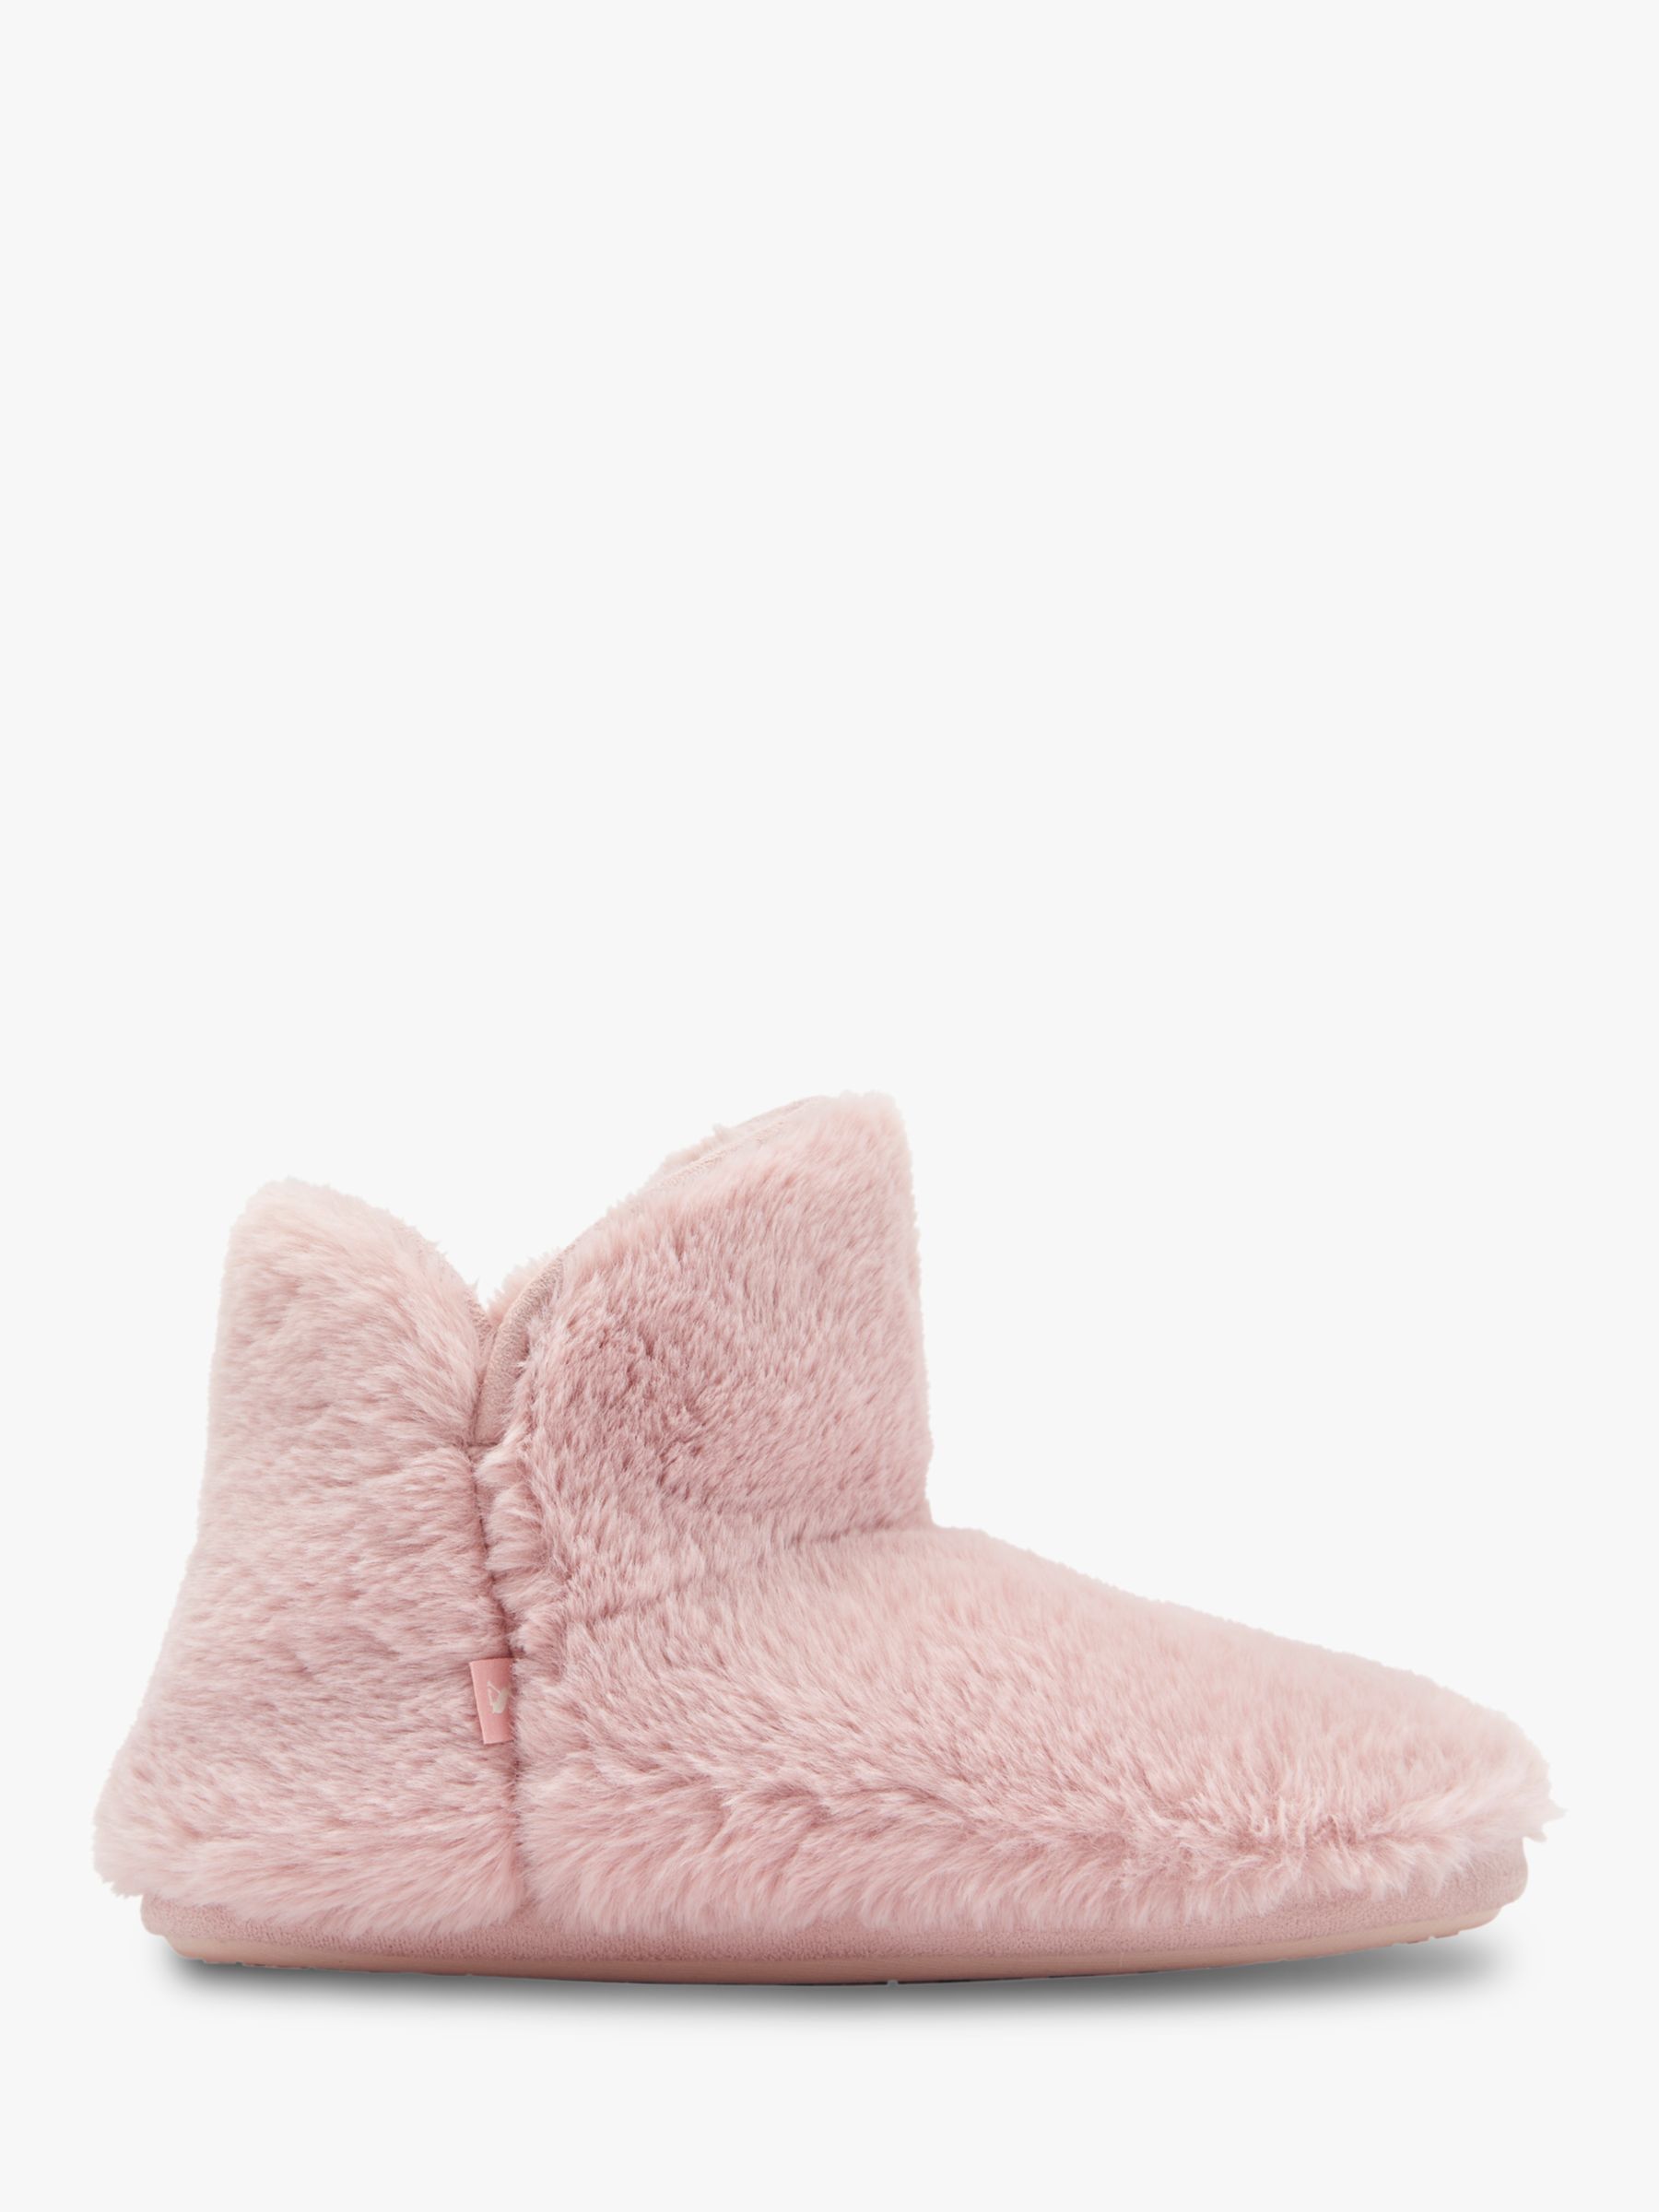 Joules Cabin Luxe Bootie Slippers at John Lewis & Partners